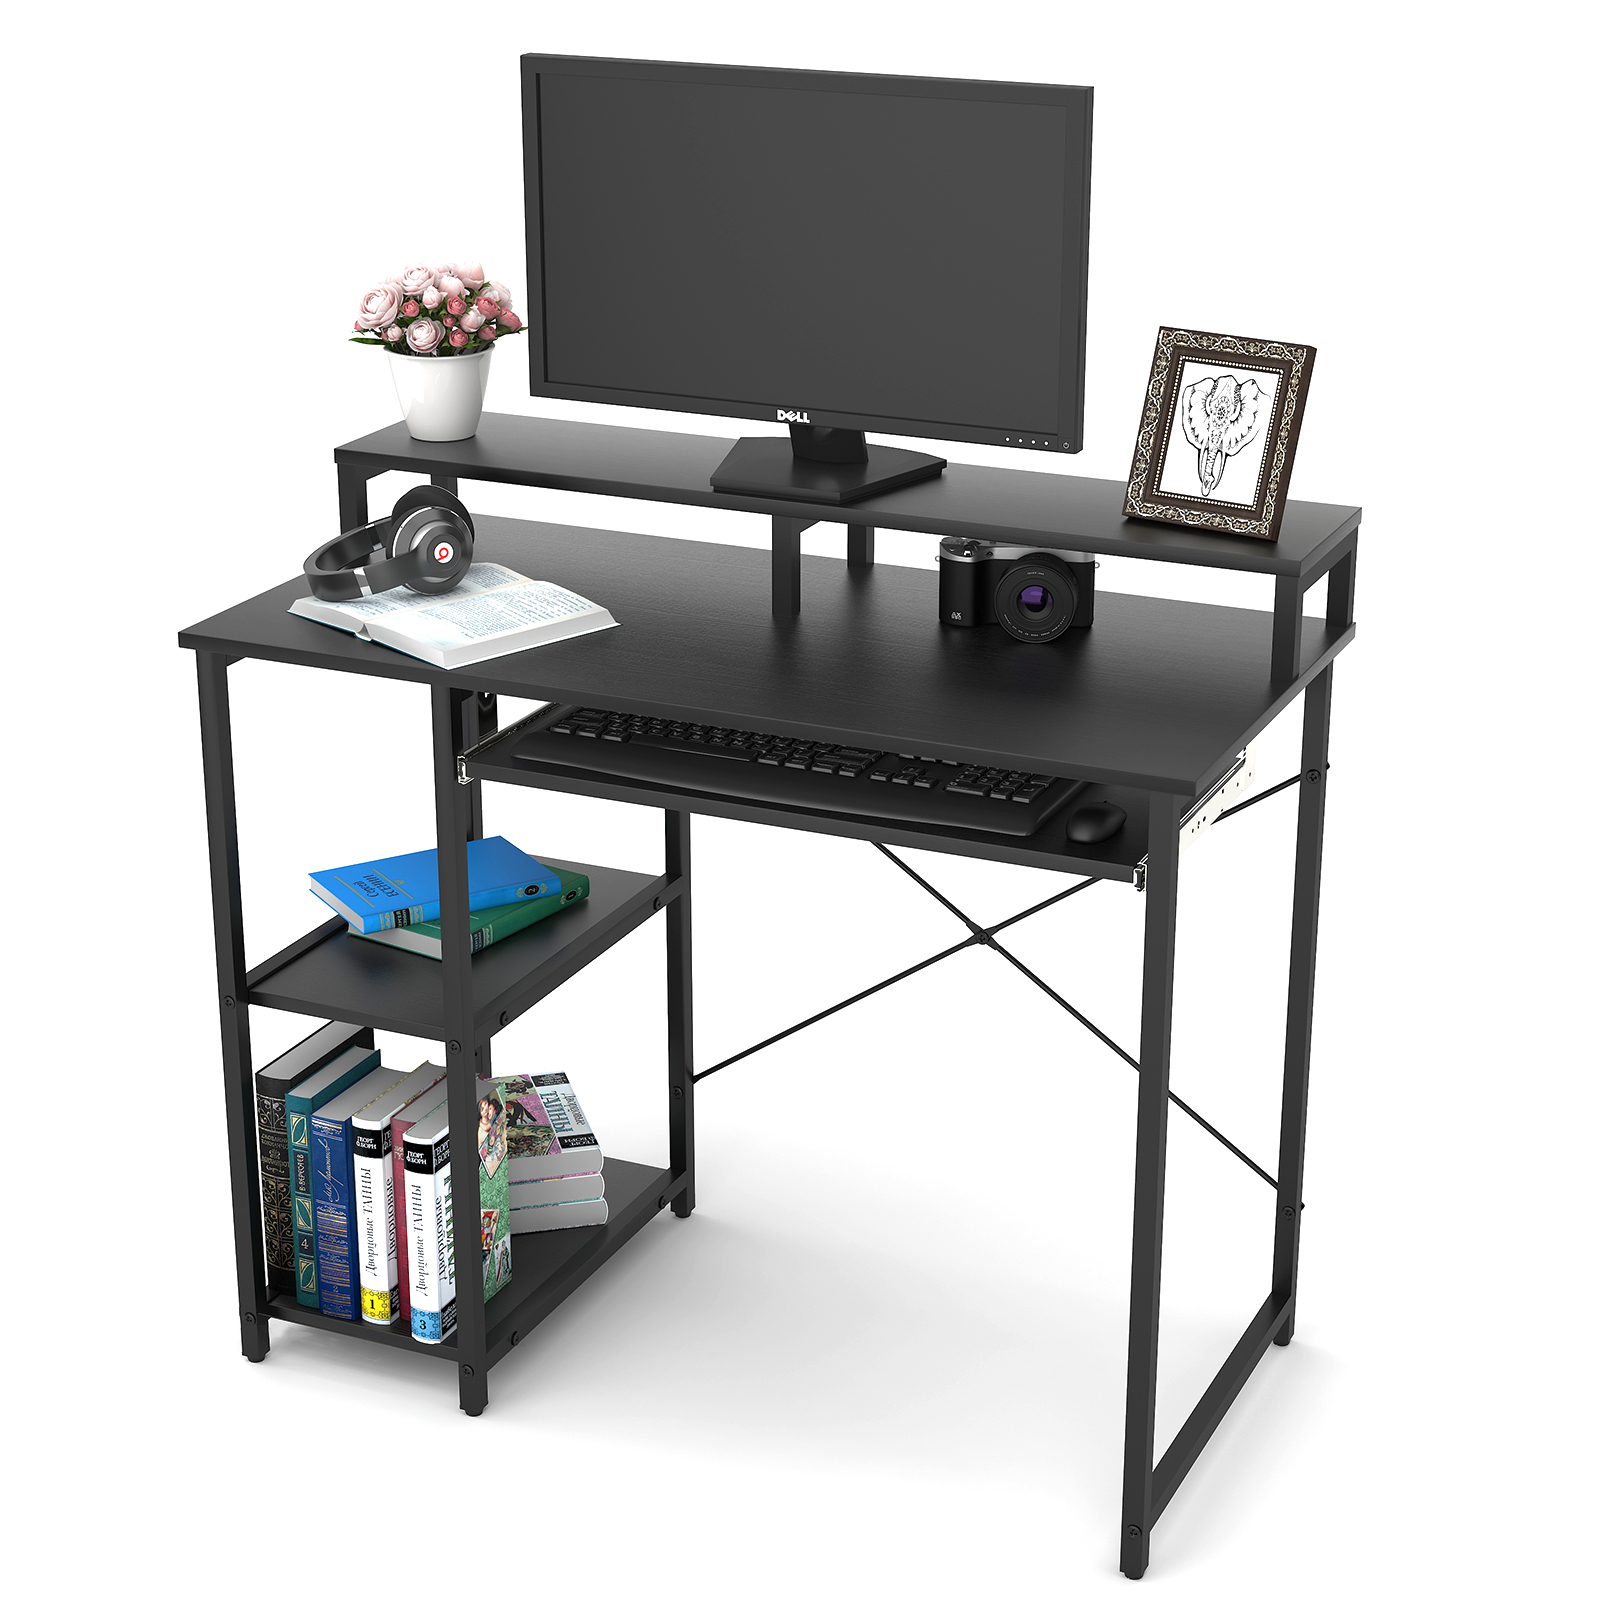 TOPSKY 38.6" Compact Computer Desk with Storage Shelves/24.5” Keyboard Tray/Monitor Stand Study Table for Home Office S-205A